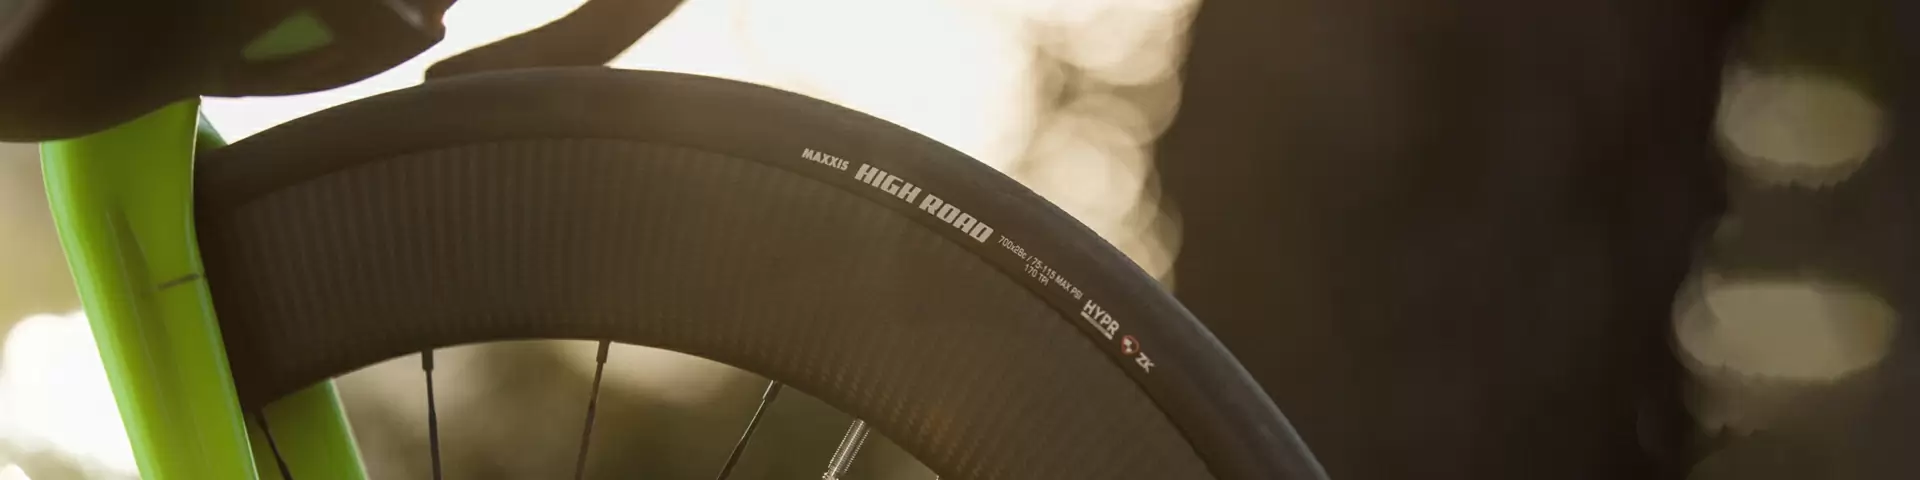 Handbike and Special Tires